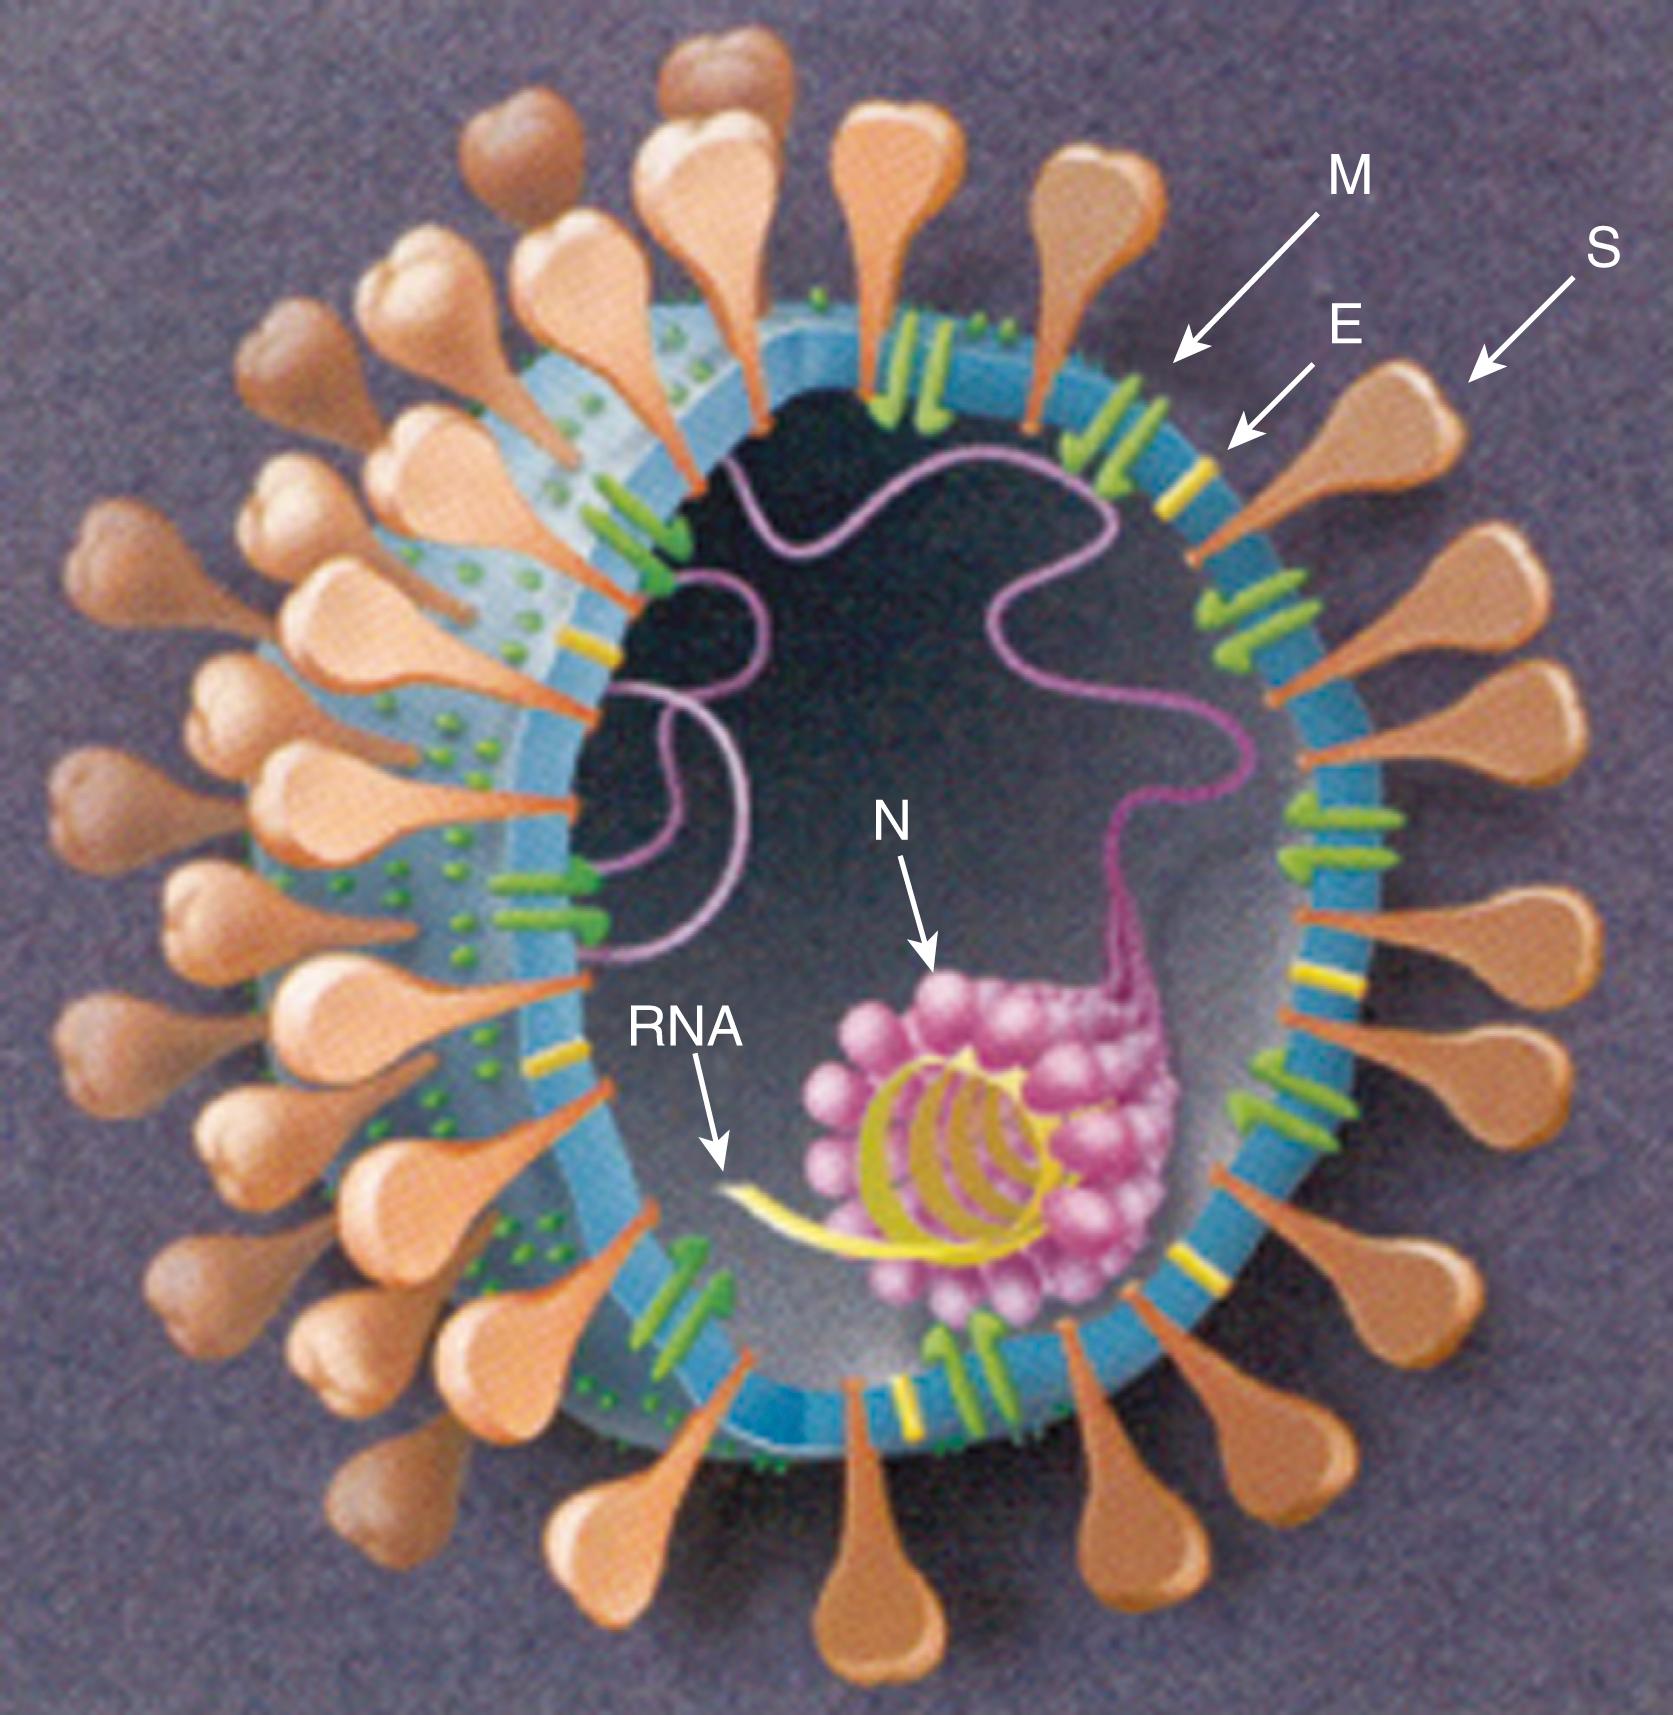 FIGURE 222.2, Organization of the spike (S), membrane (M), and envelope (E) glycoproteins in a typical coronavirus is shown for a typical coronavirus. The RNA is protected by the nucleocapsid proteins (N).